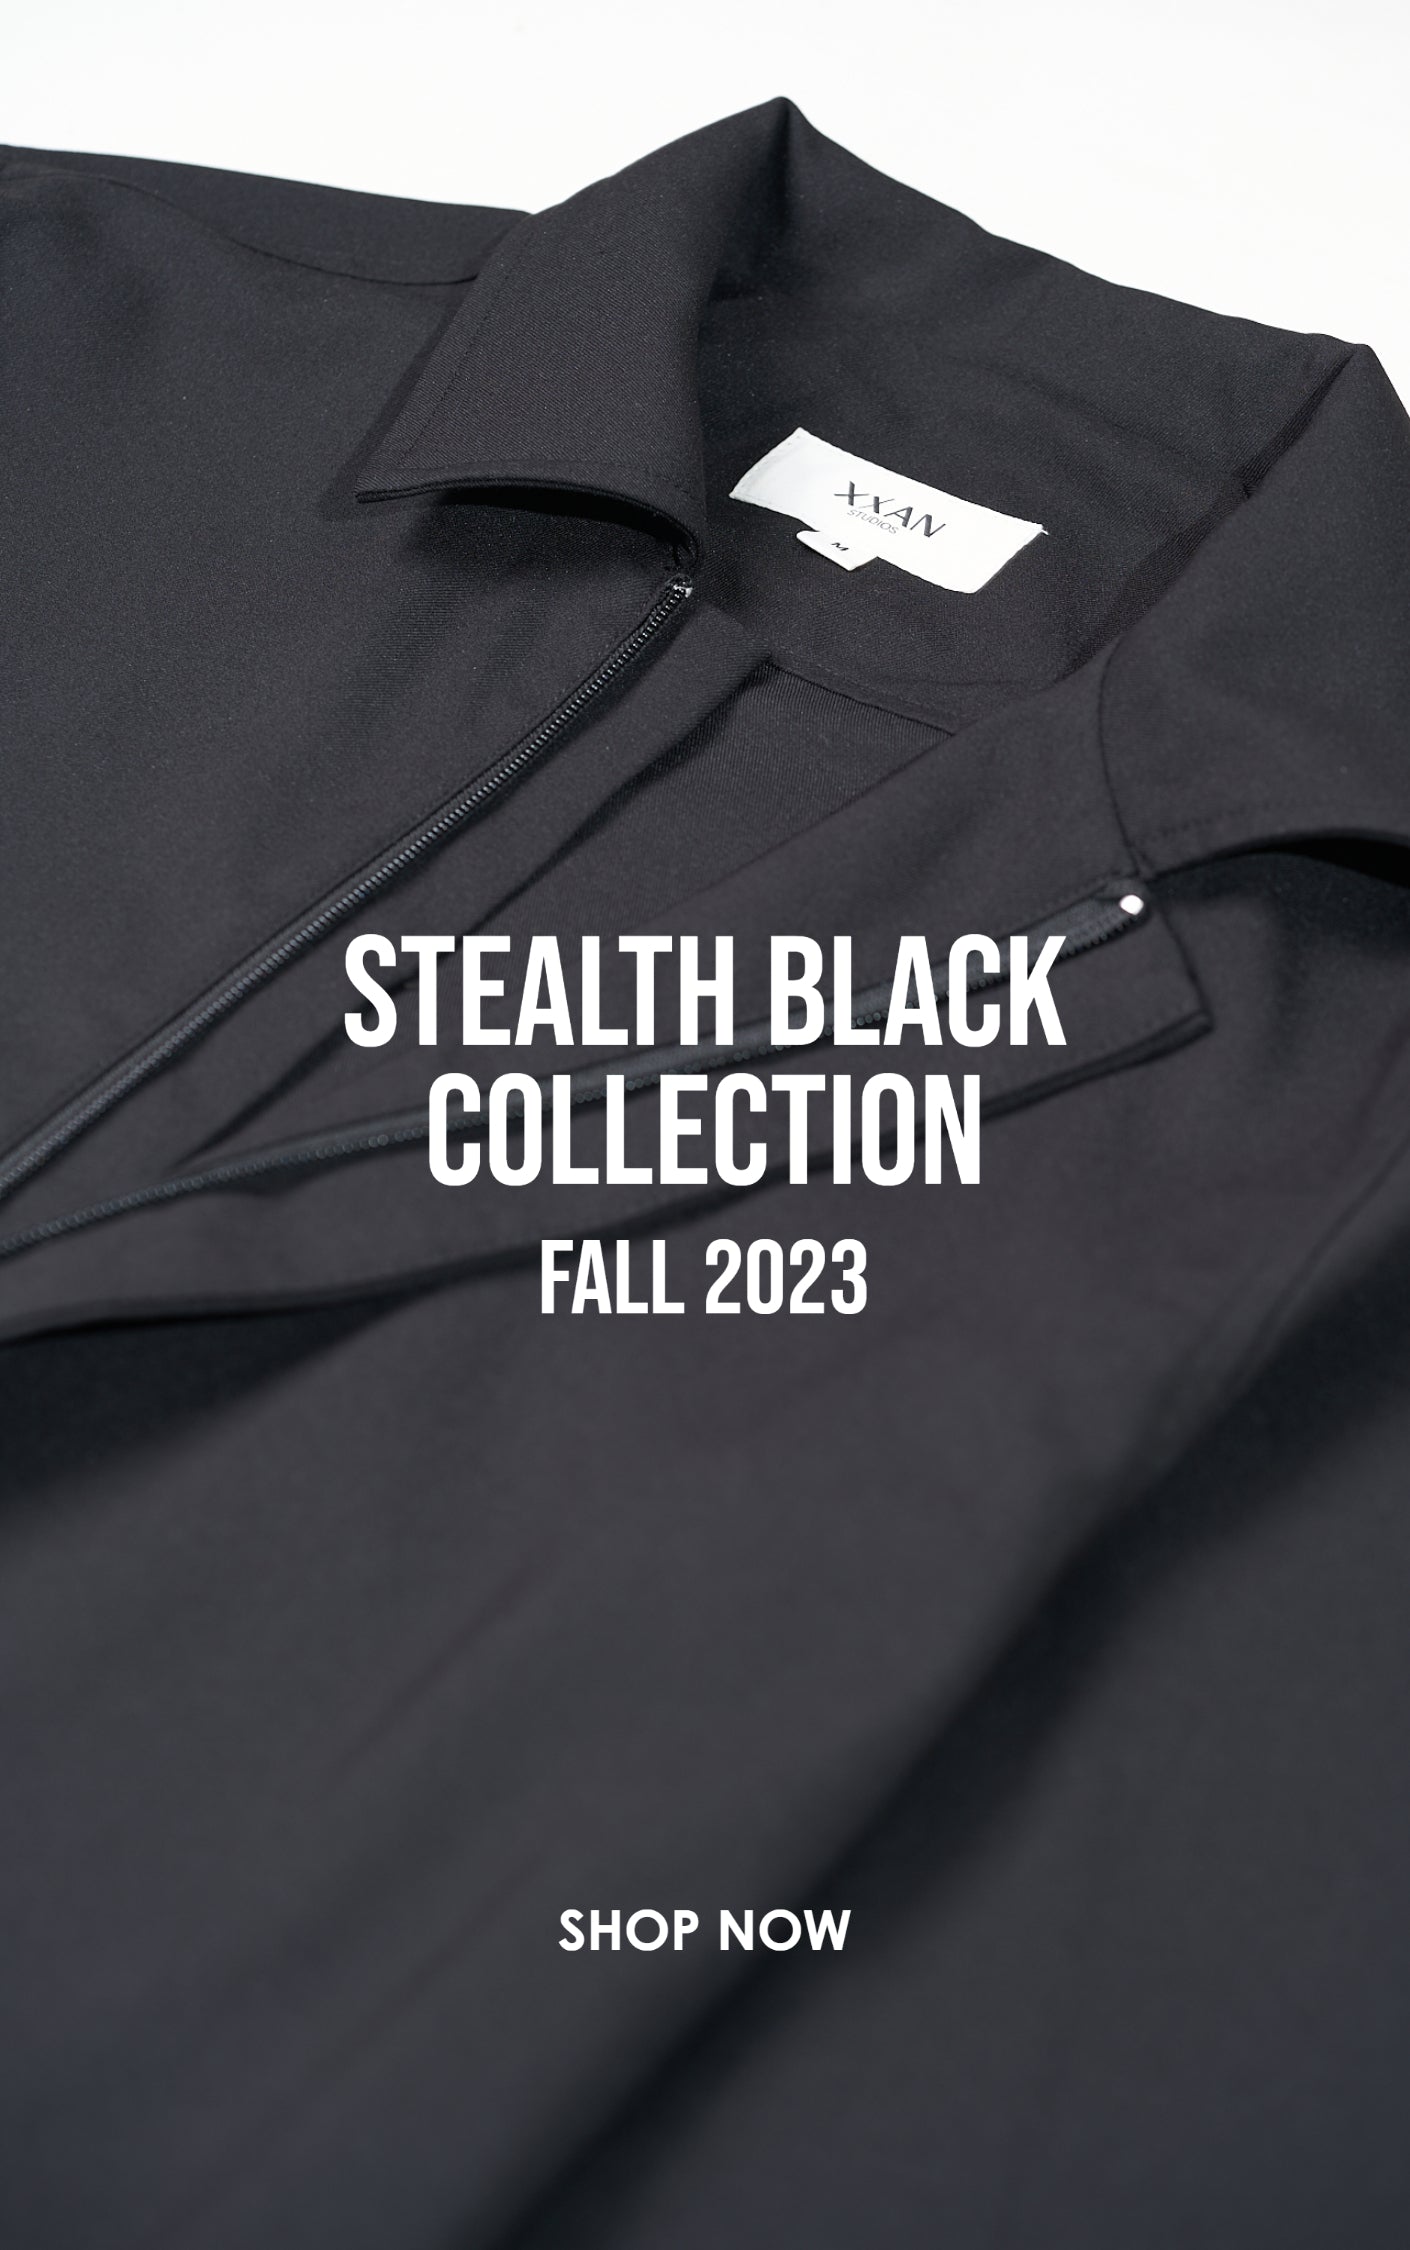 Stealth Black Collection